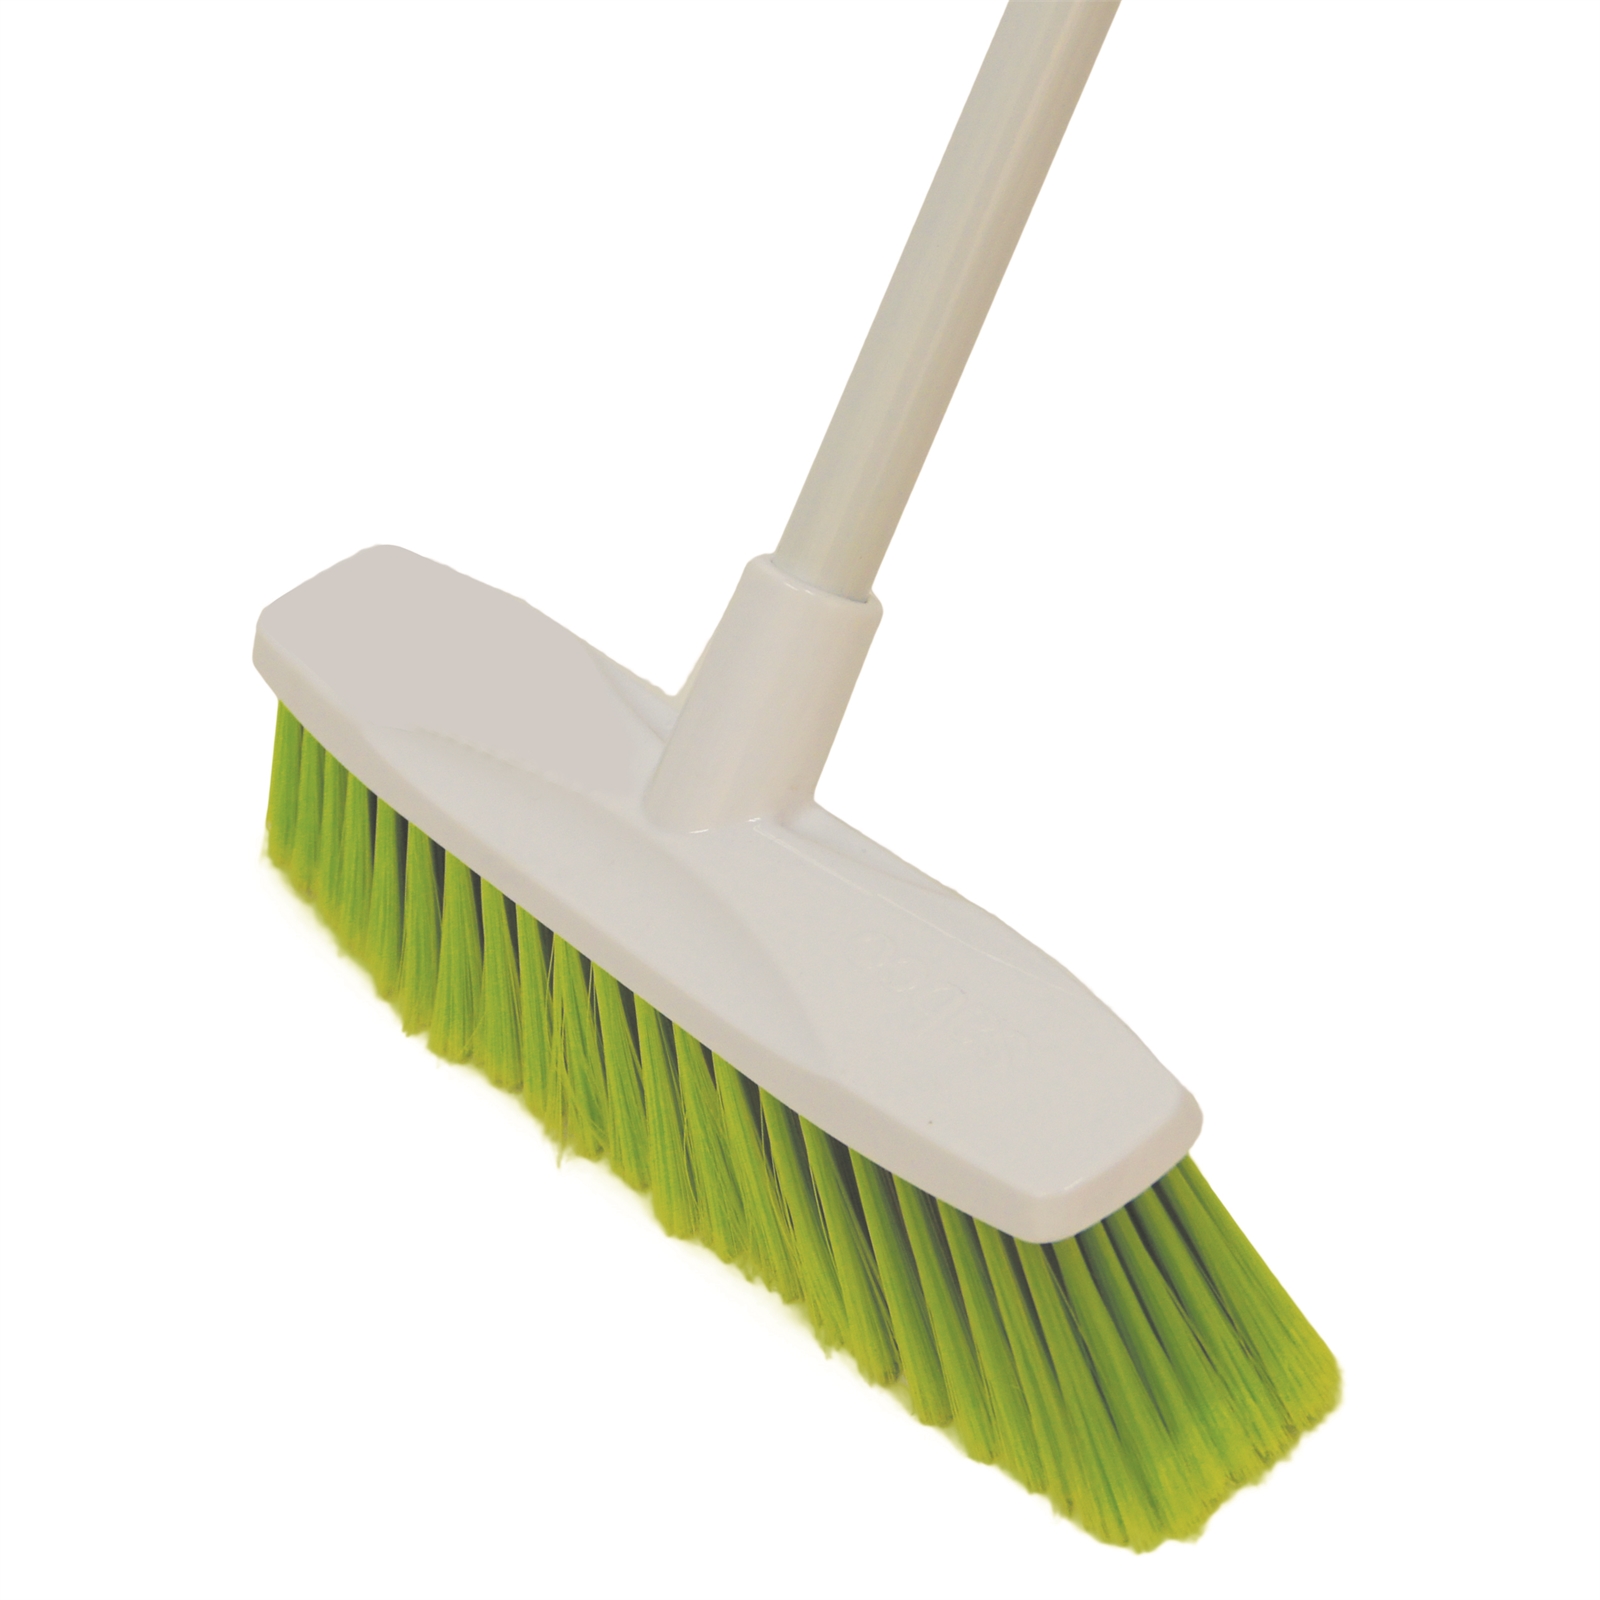 Buy Electrostatic Rubber Broom With Extendable Handle - Sabco